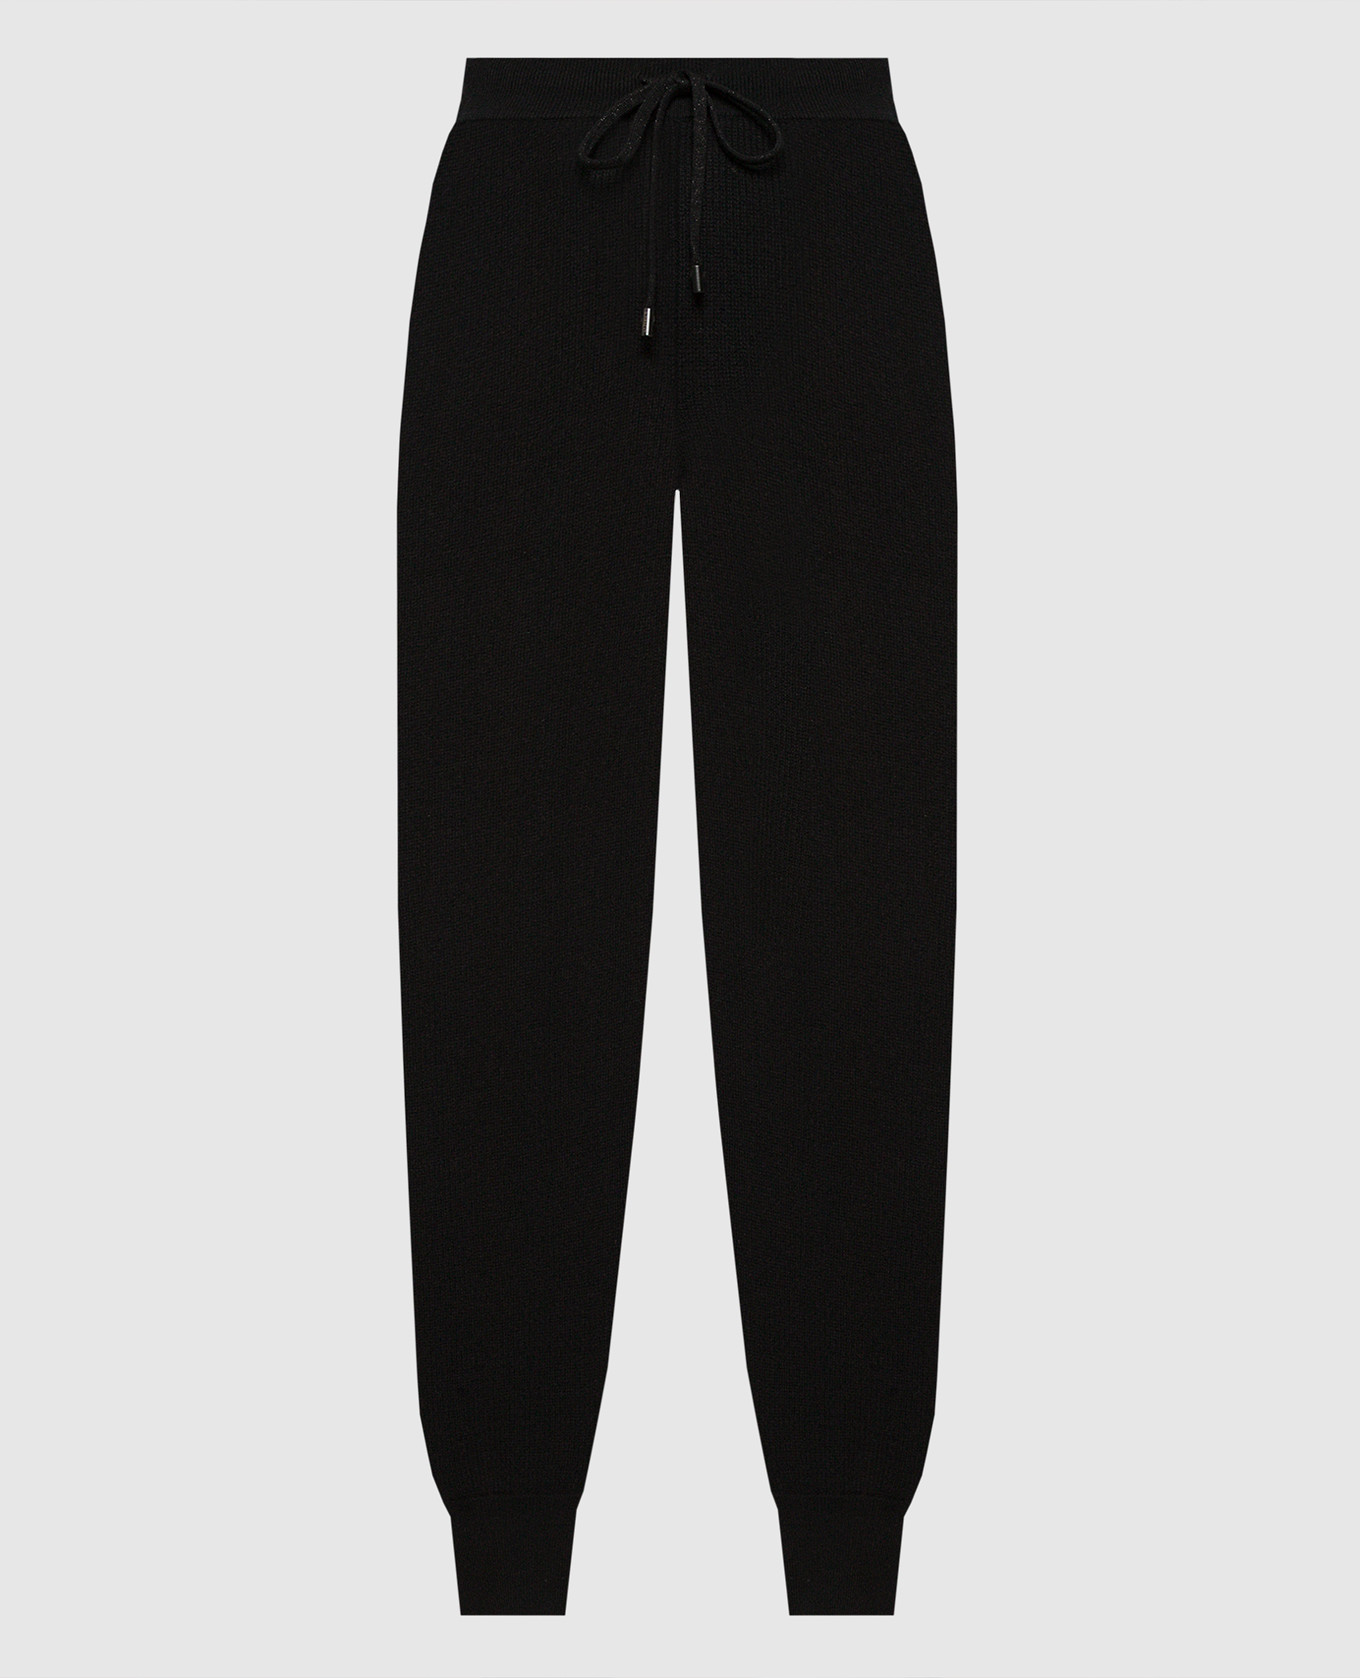 Black wool, silk and cashmere joggers with monil chain